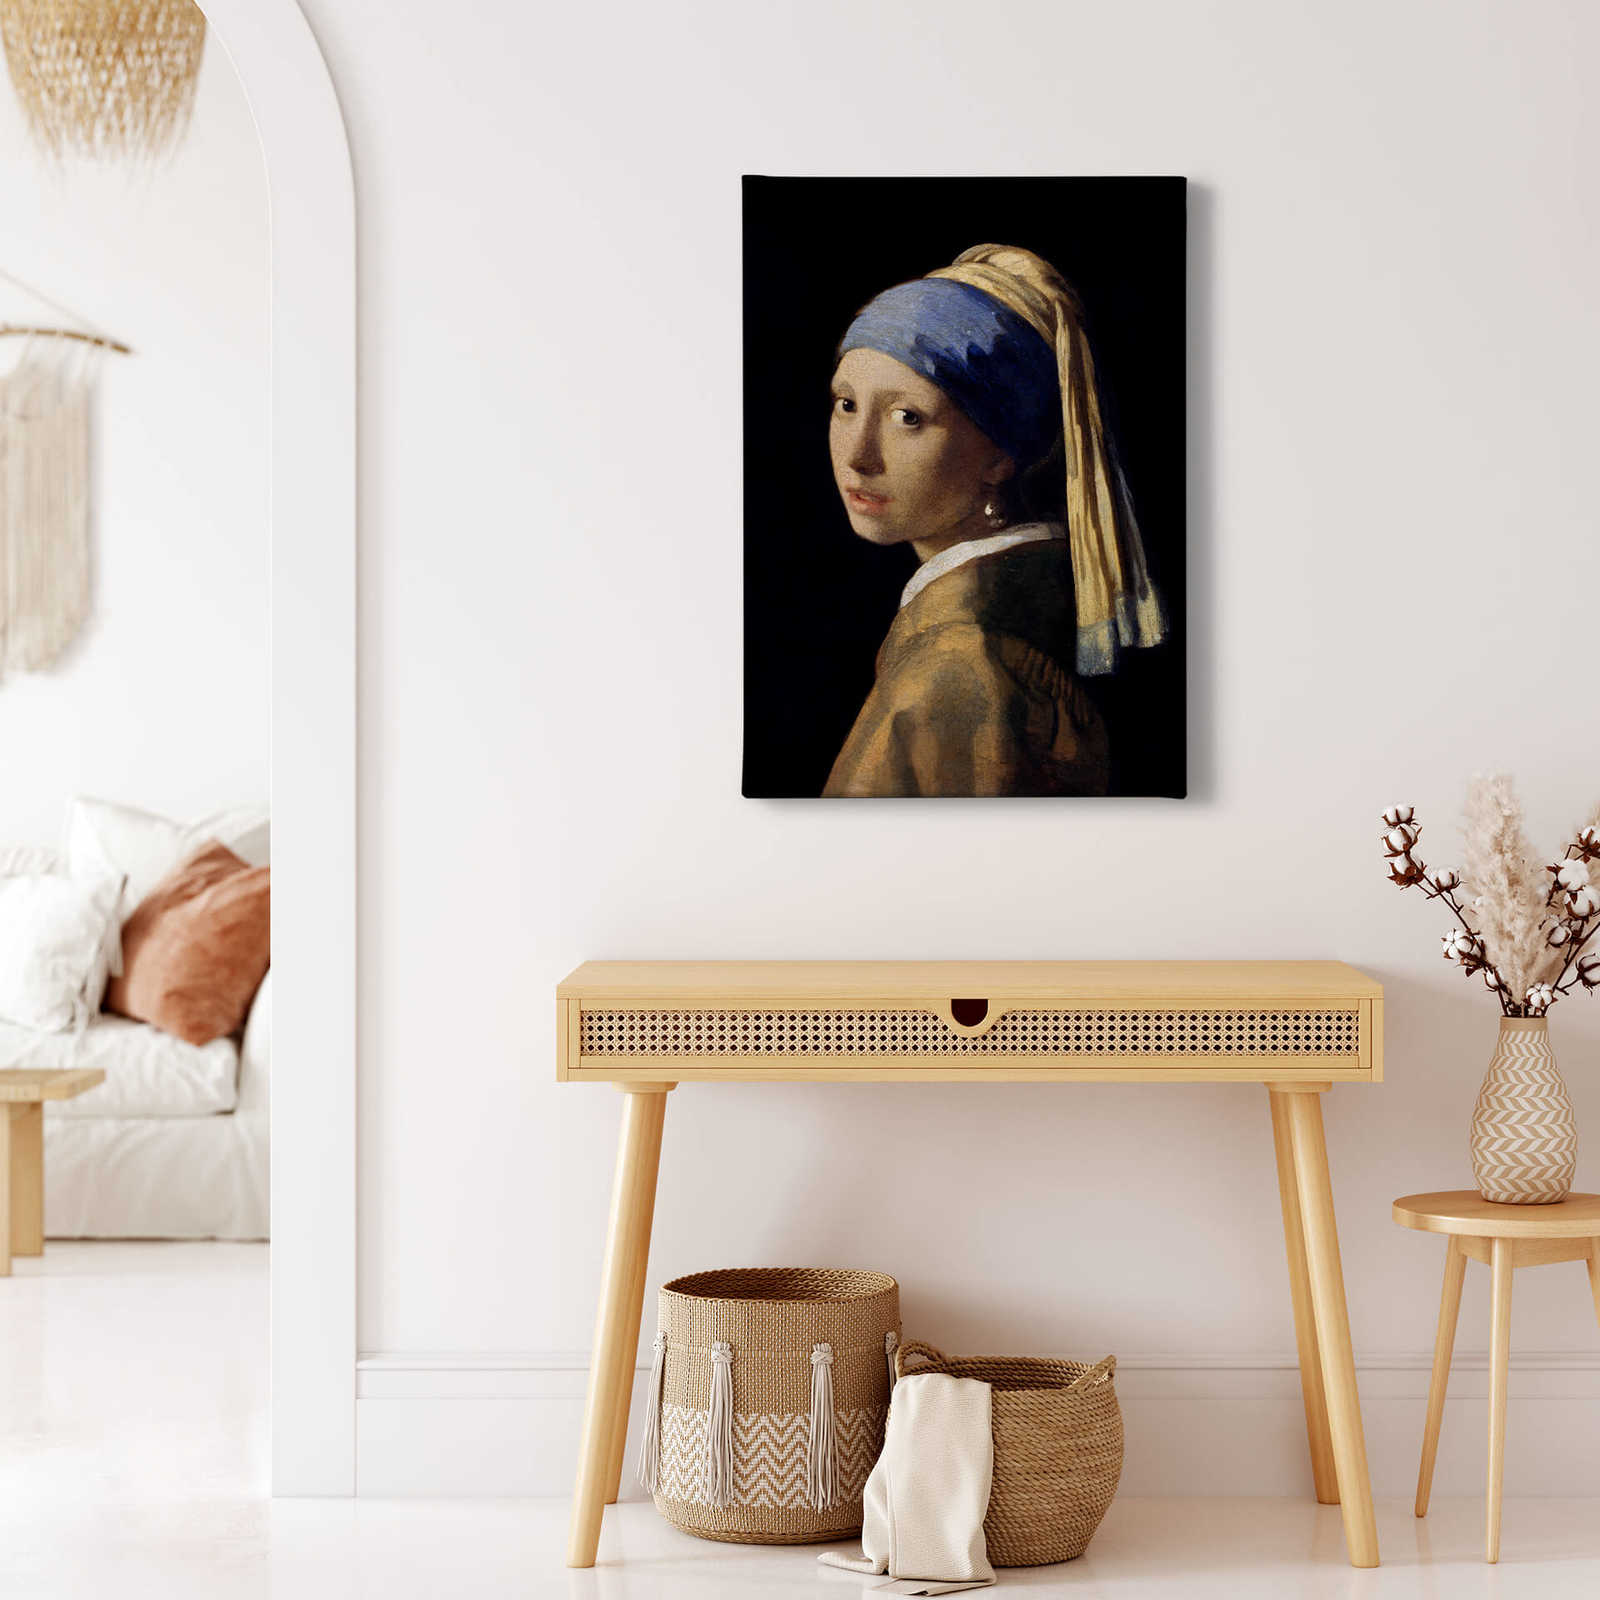             Canvas print "The girl with the pearl earring" by Dürer
        